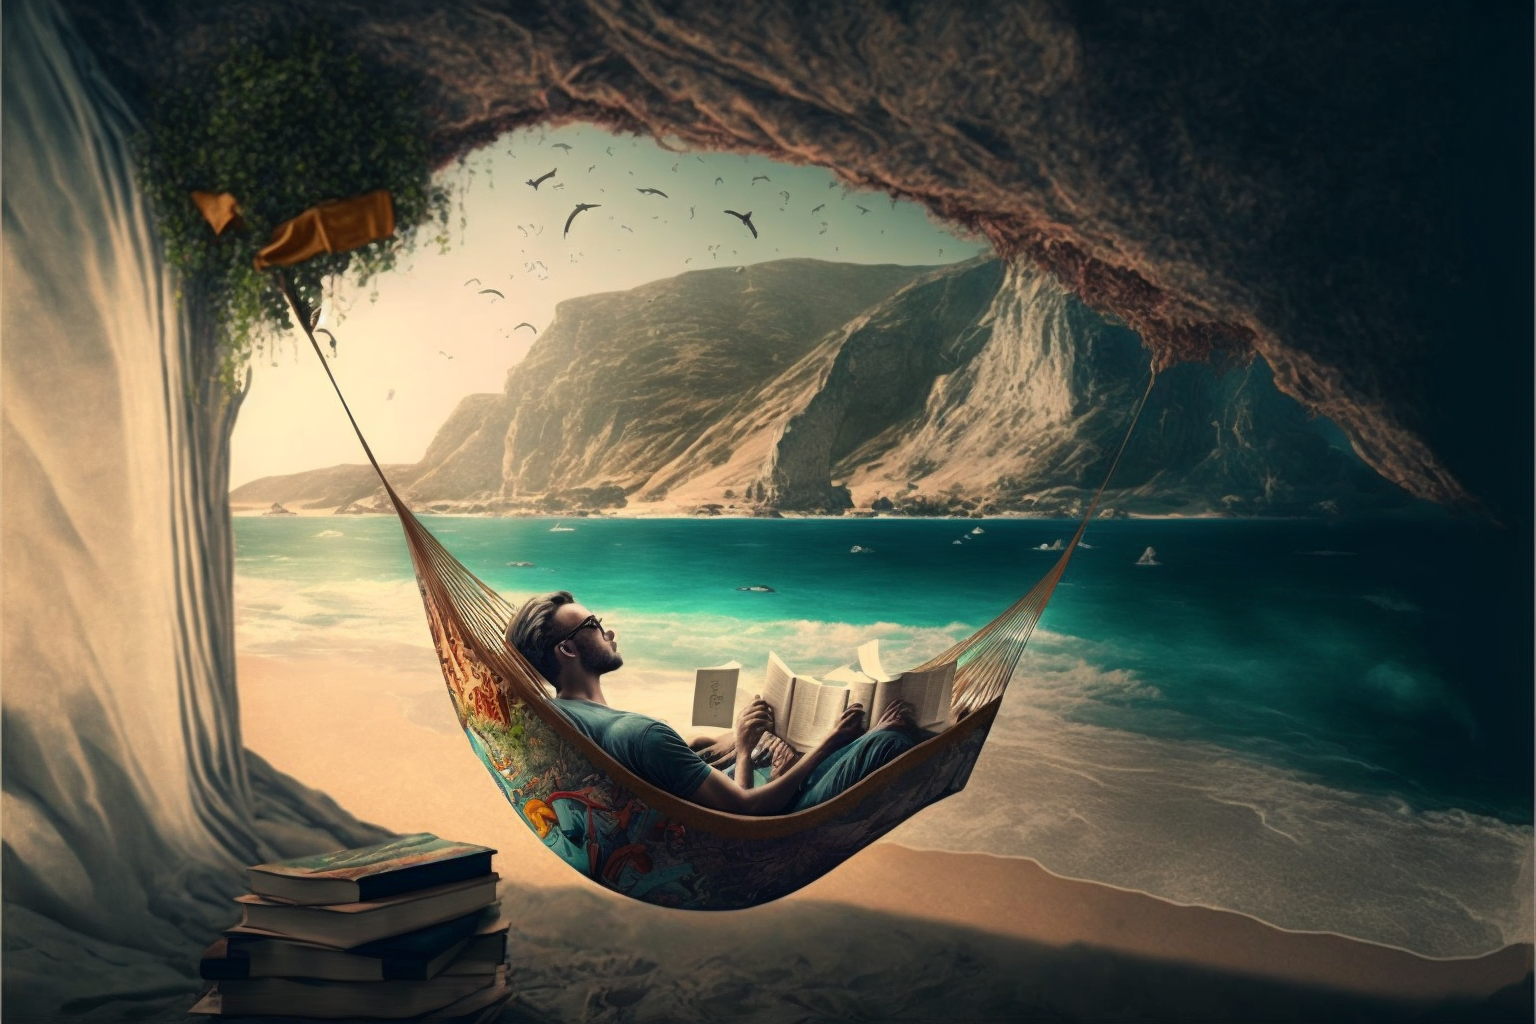 man on an island, reading, natural tent